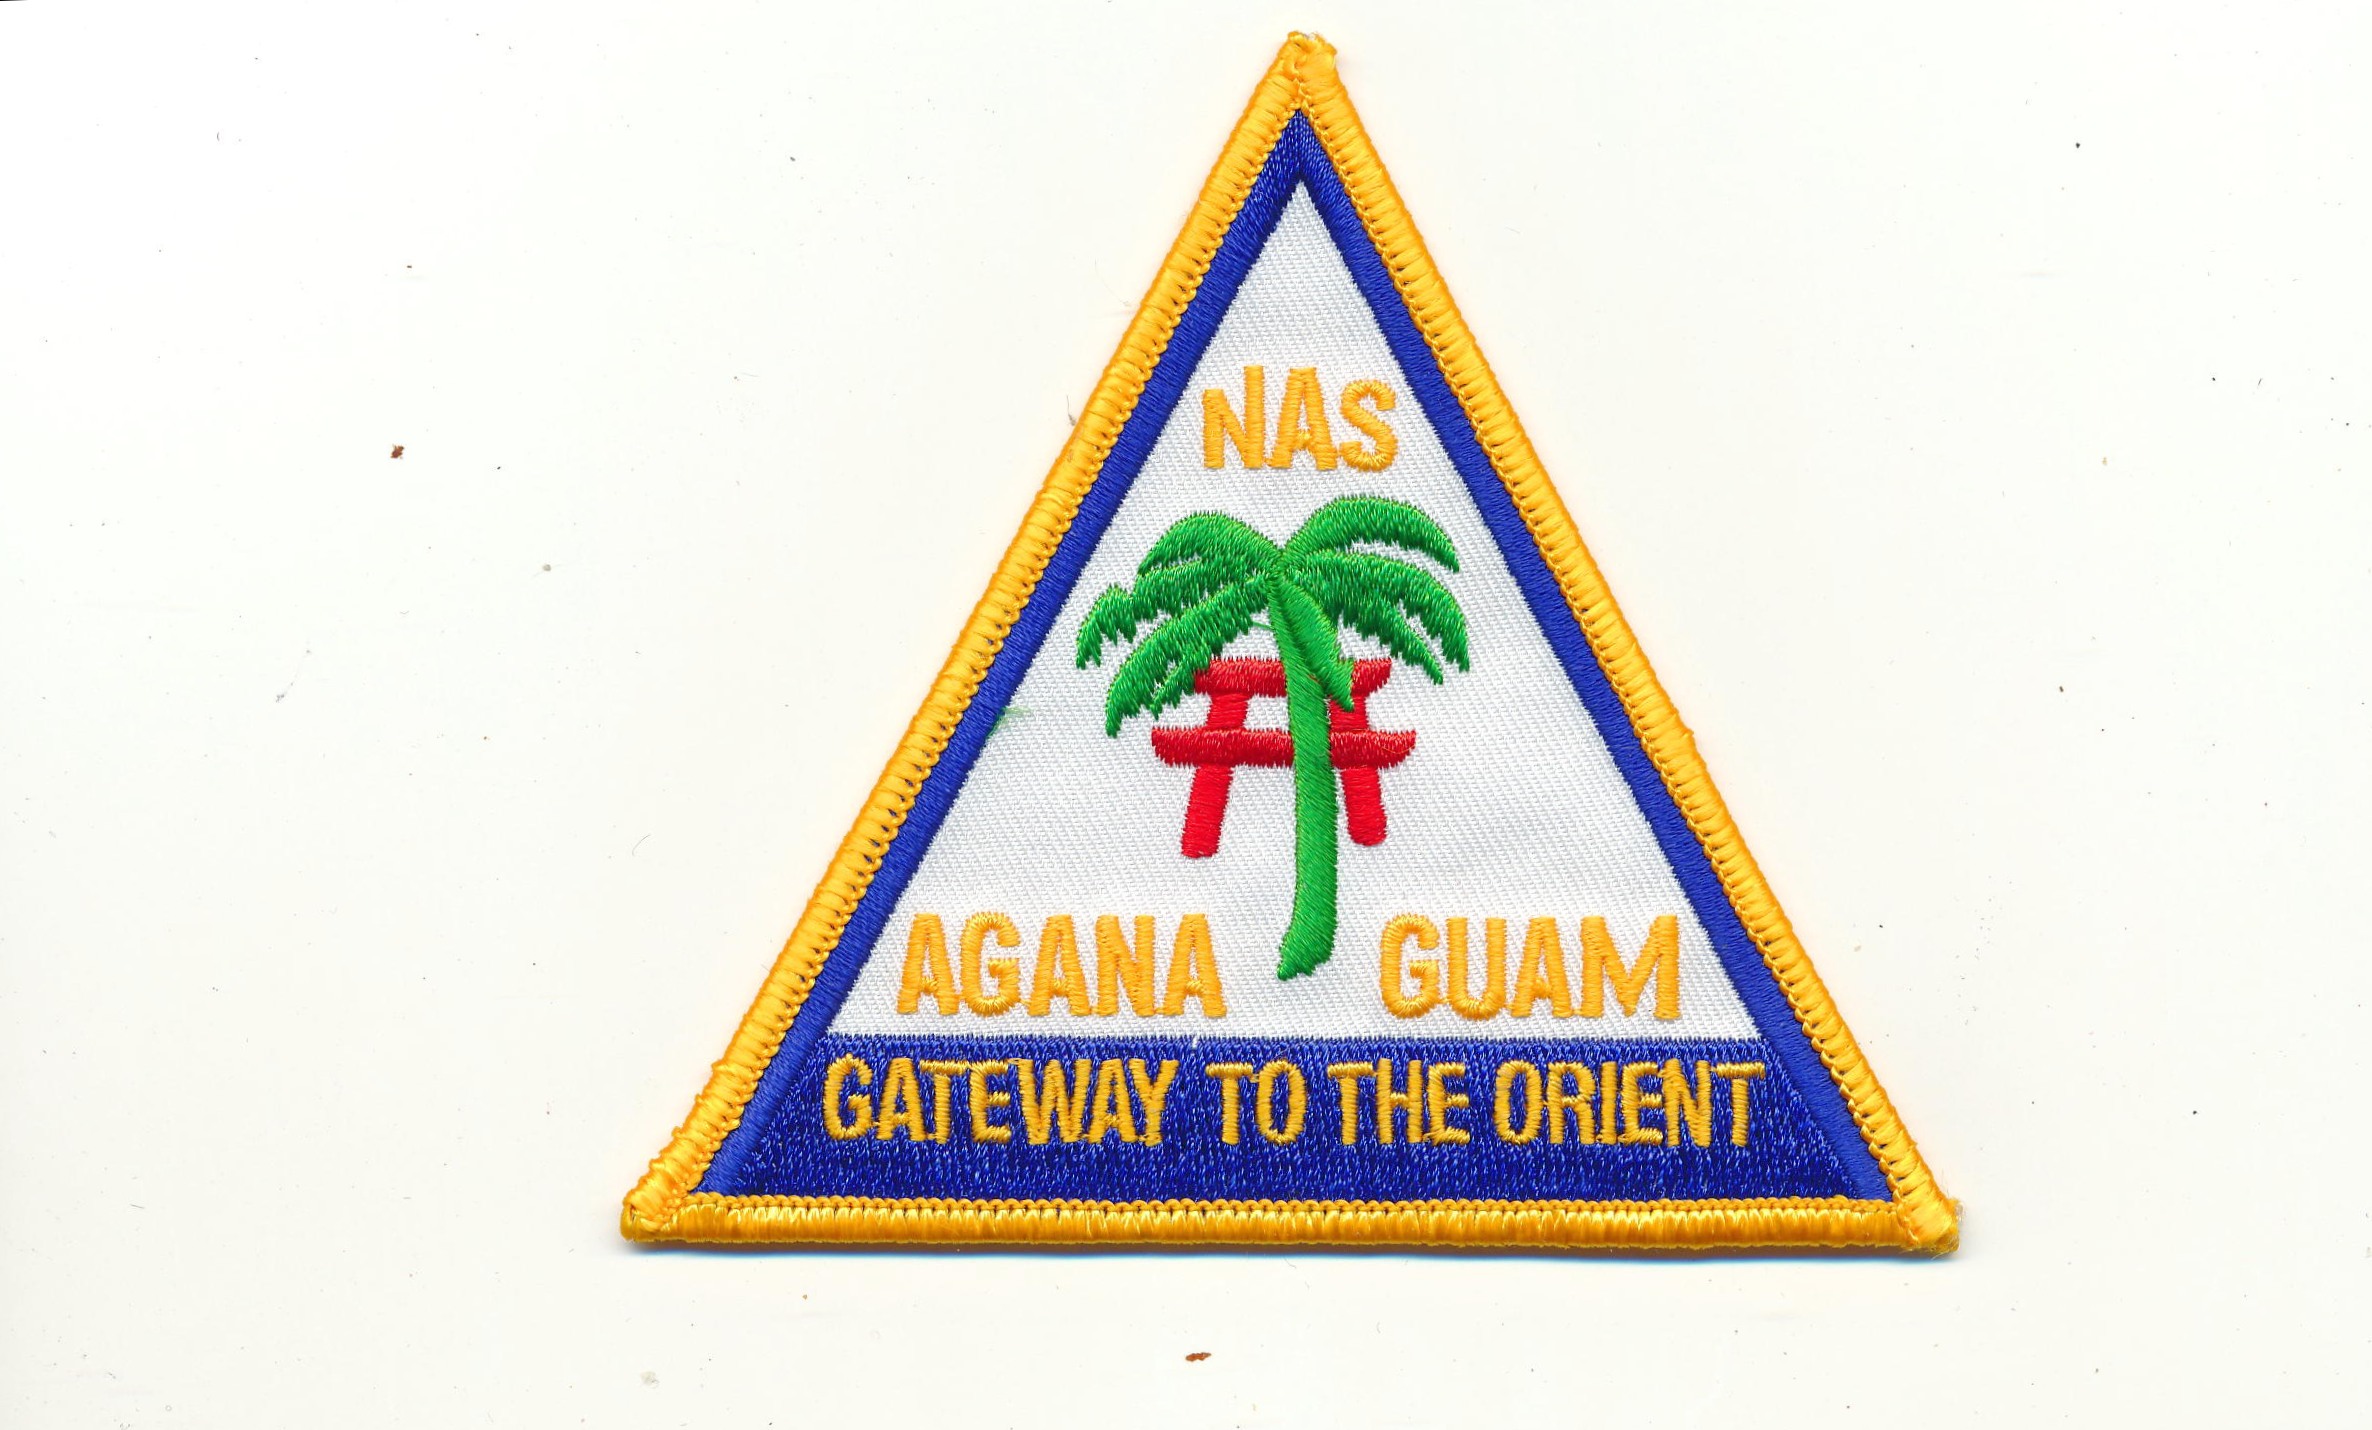 5" NAVY NAS AGANA GUAM GATEWAY TO THE ORIENT EMBROIDERED PATCH 